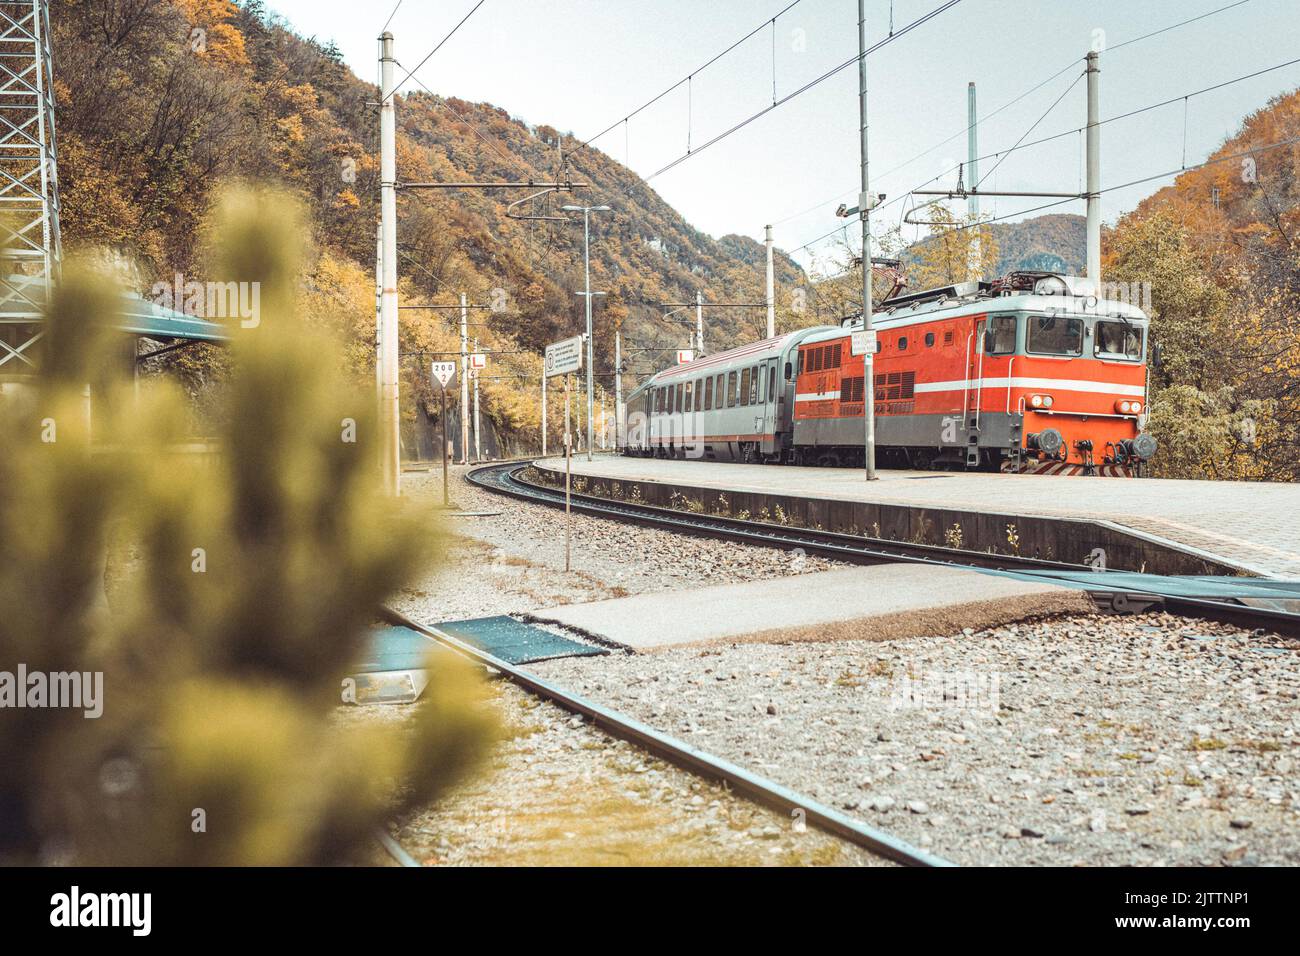 Passenger train with red locomotive rushing through the station of Trbovlje in early autumn. Stock Photo